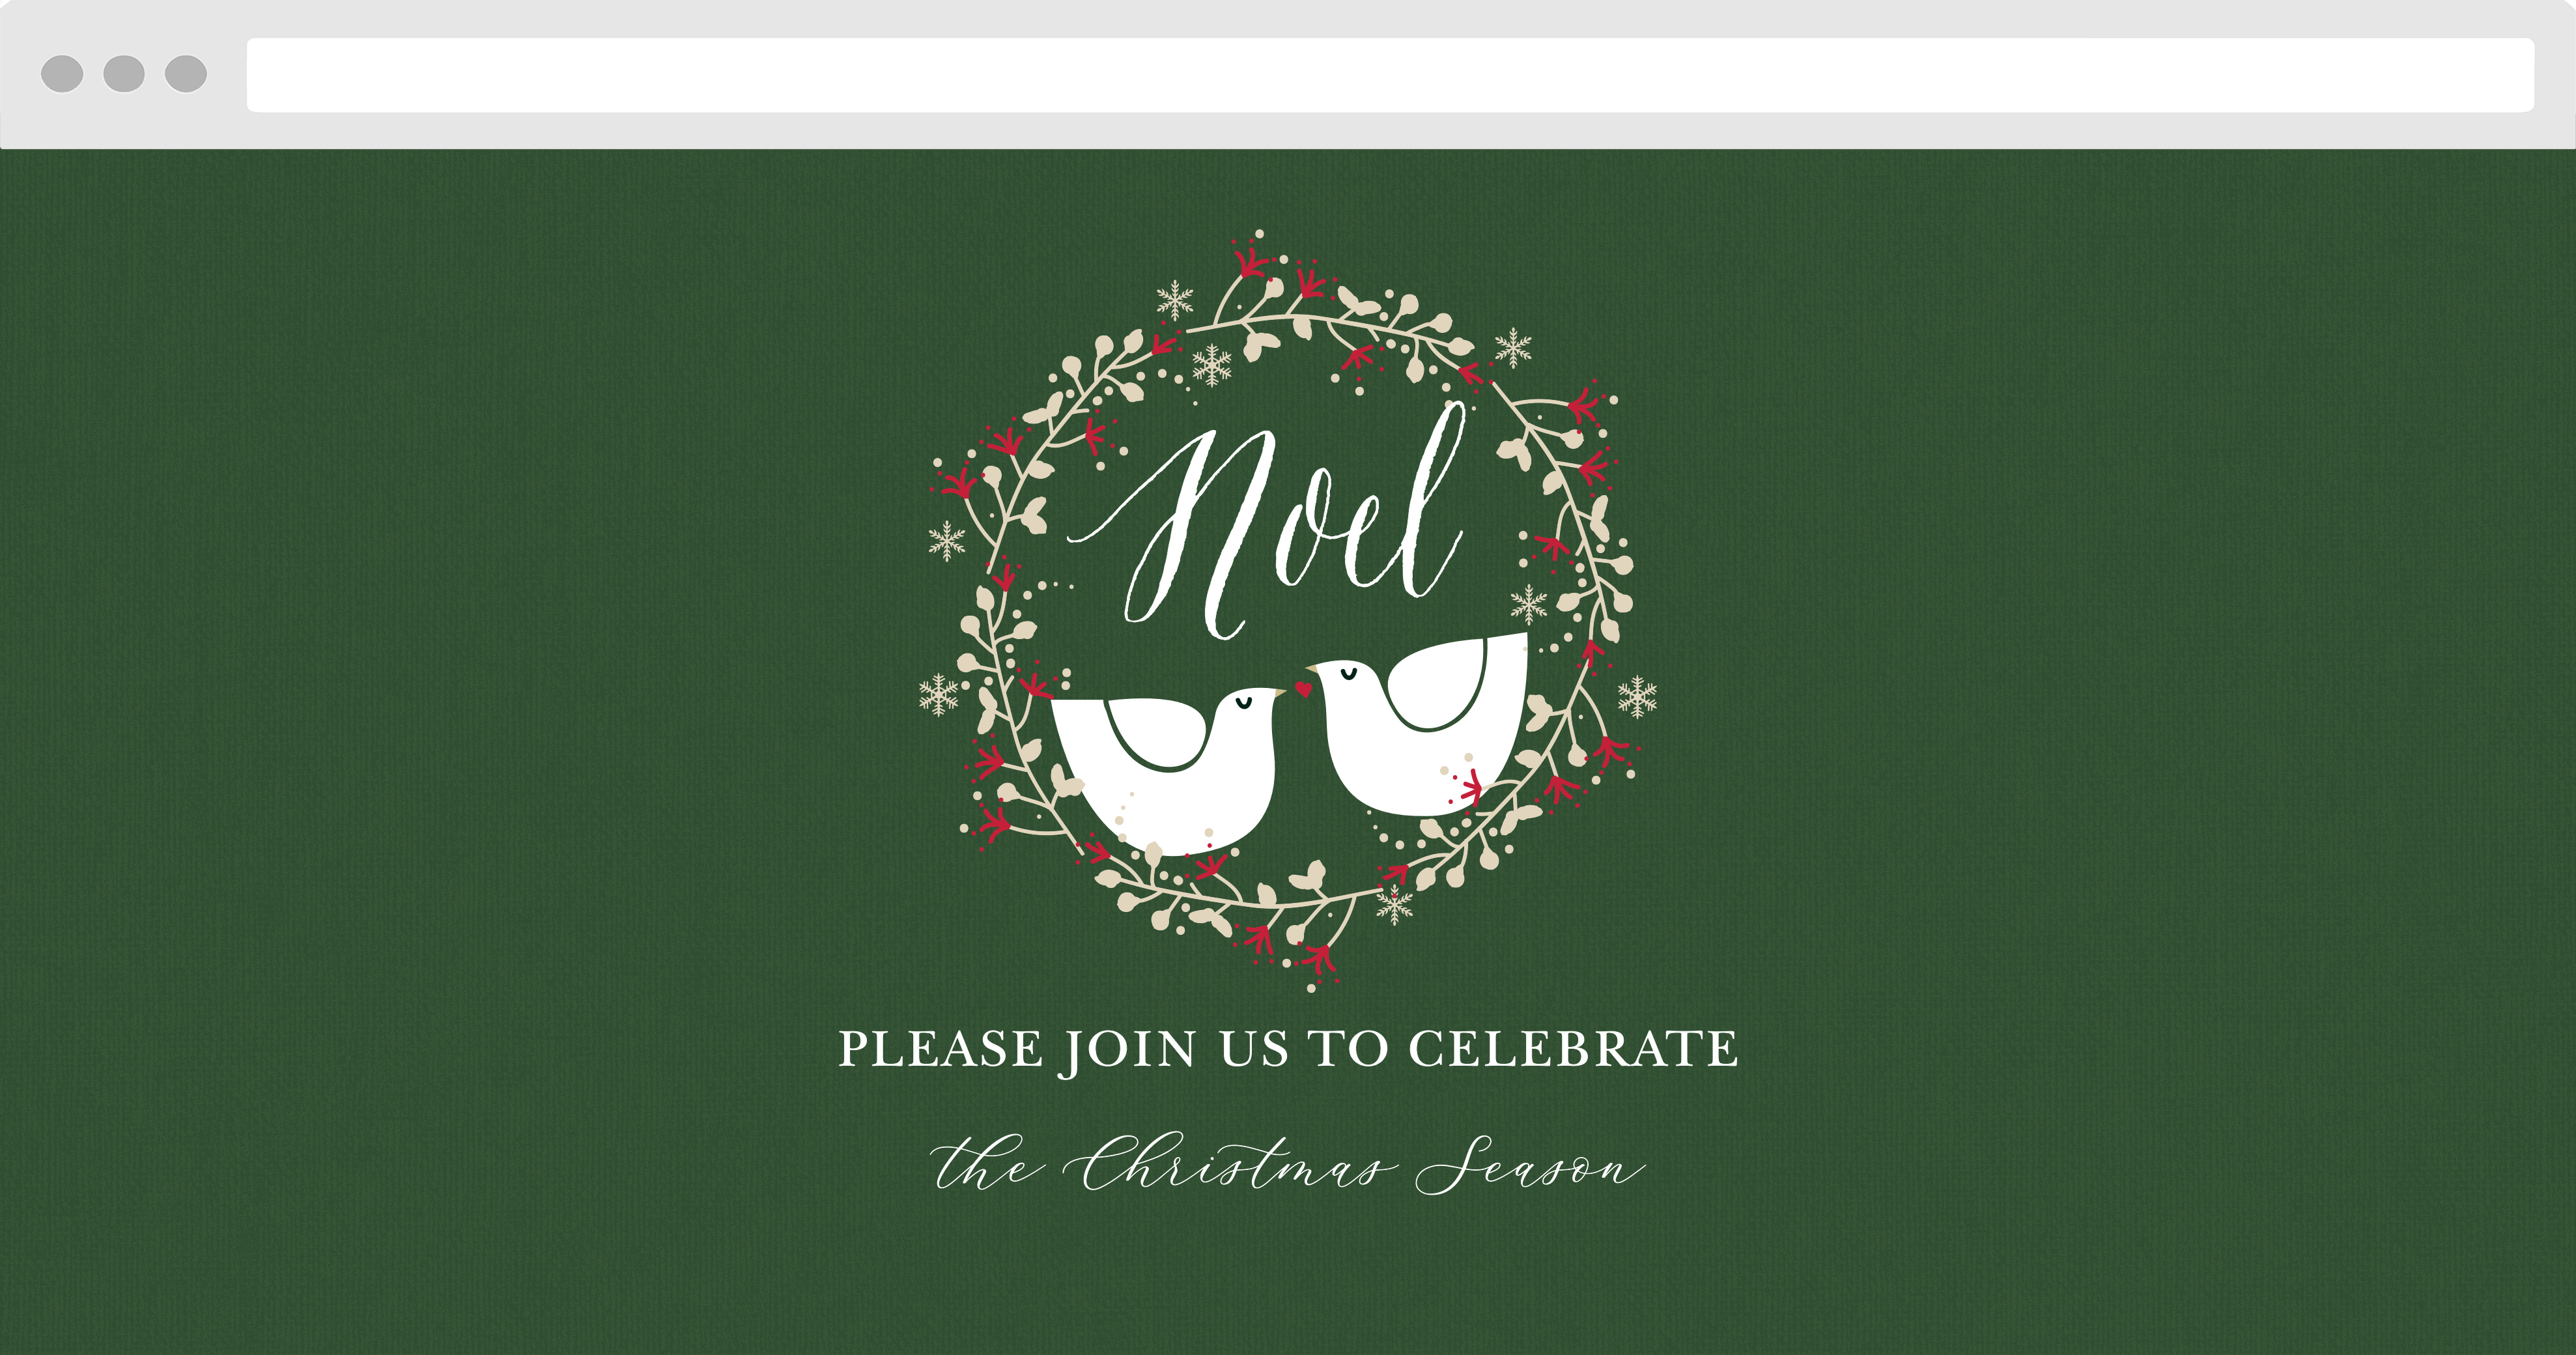 Two Turtle Doves Holiday Website